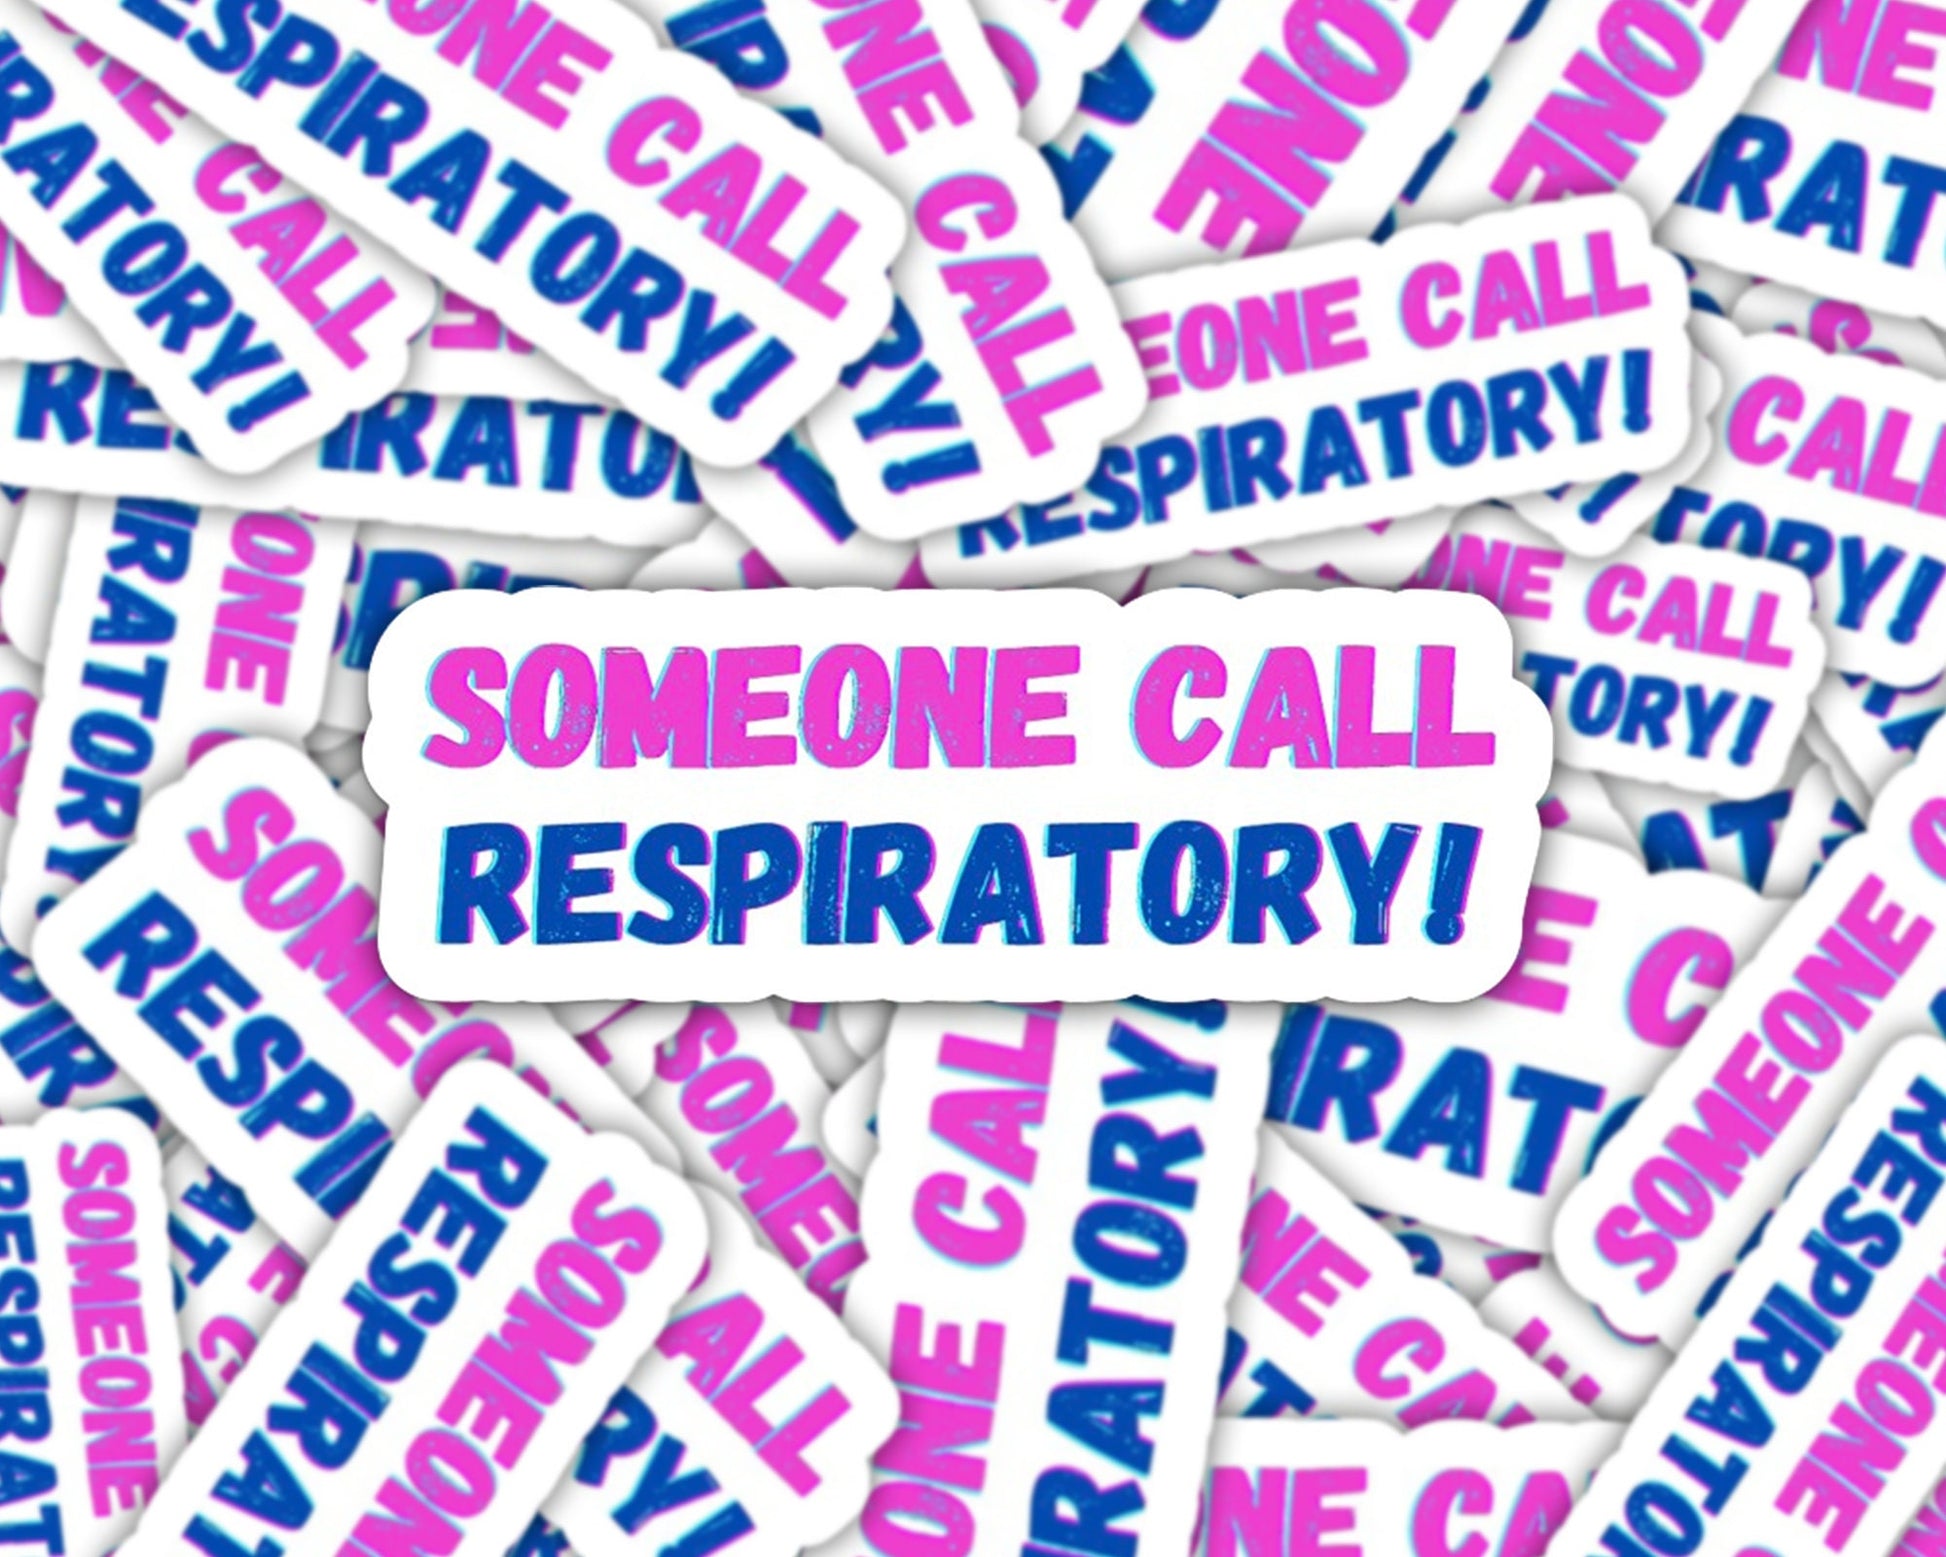 someone call respiratory, gifts for respiratory therapist, respiratory stickers, respiratory graduation gift, gifts for coworker rt